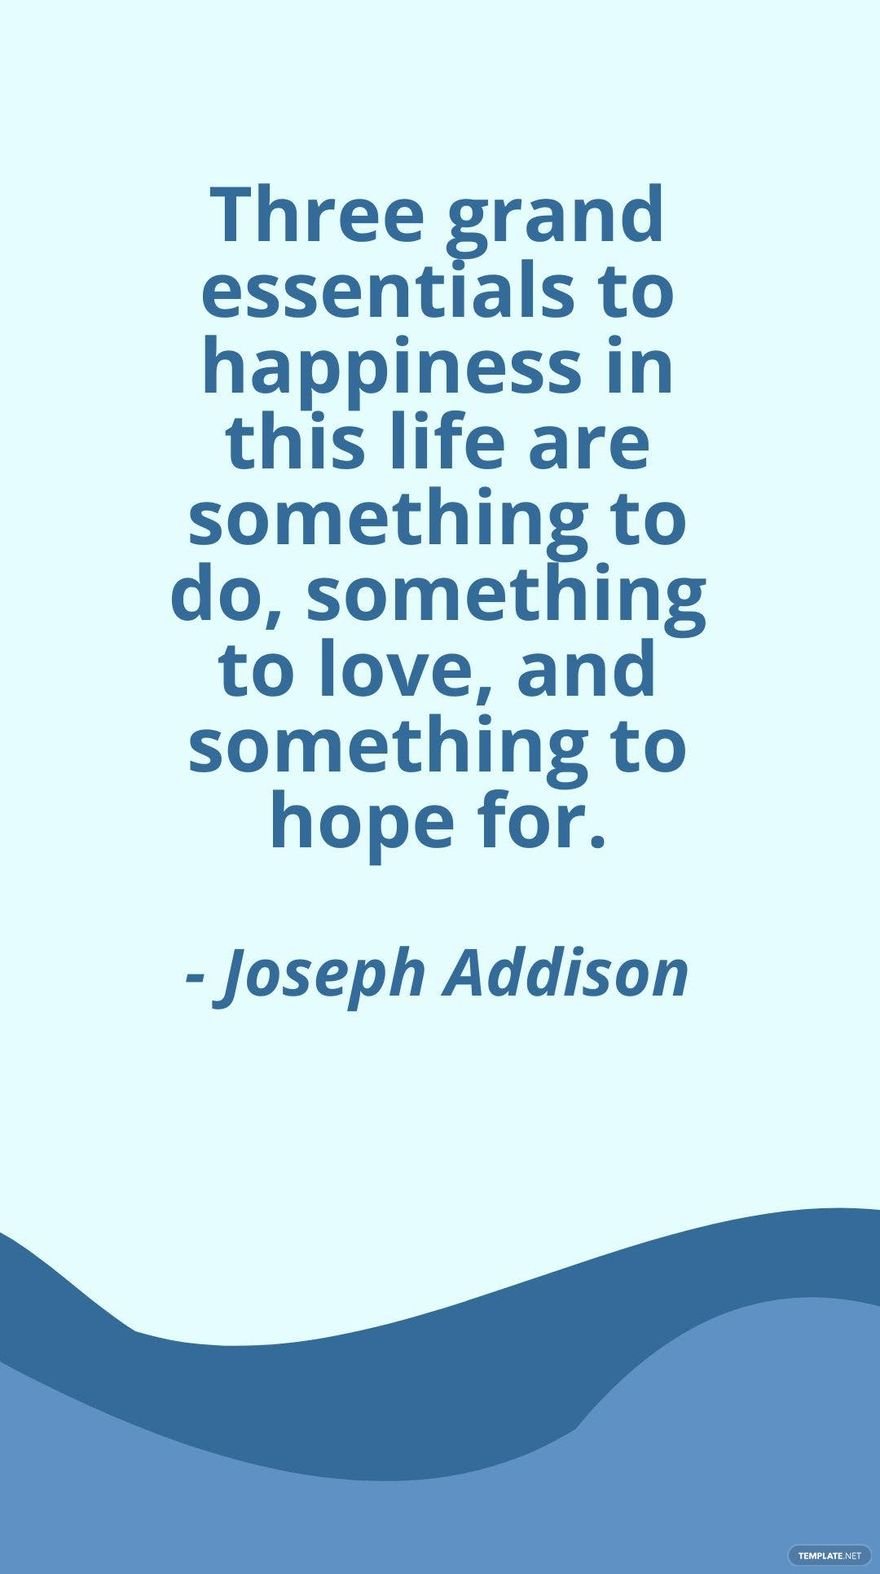 Joseph Addison - Three grand essentials to happiness in this life are something to do, something to love, and something to hope for.